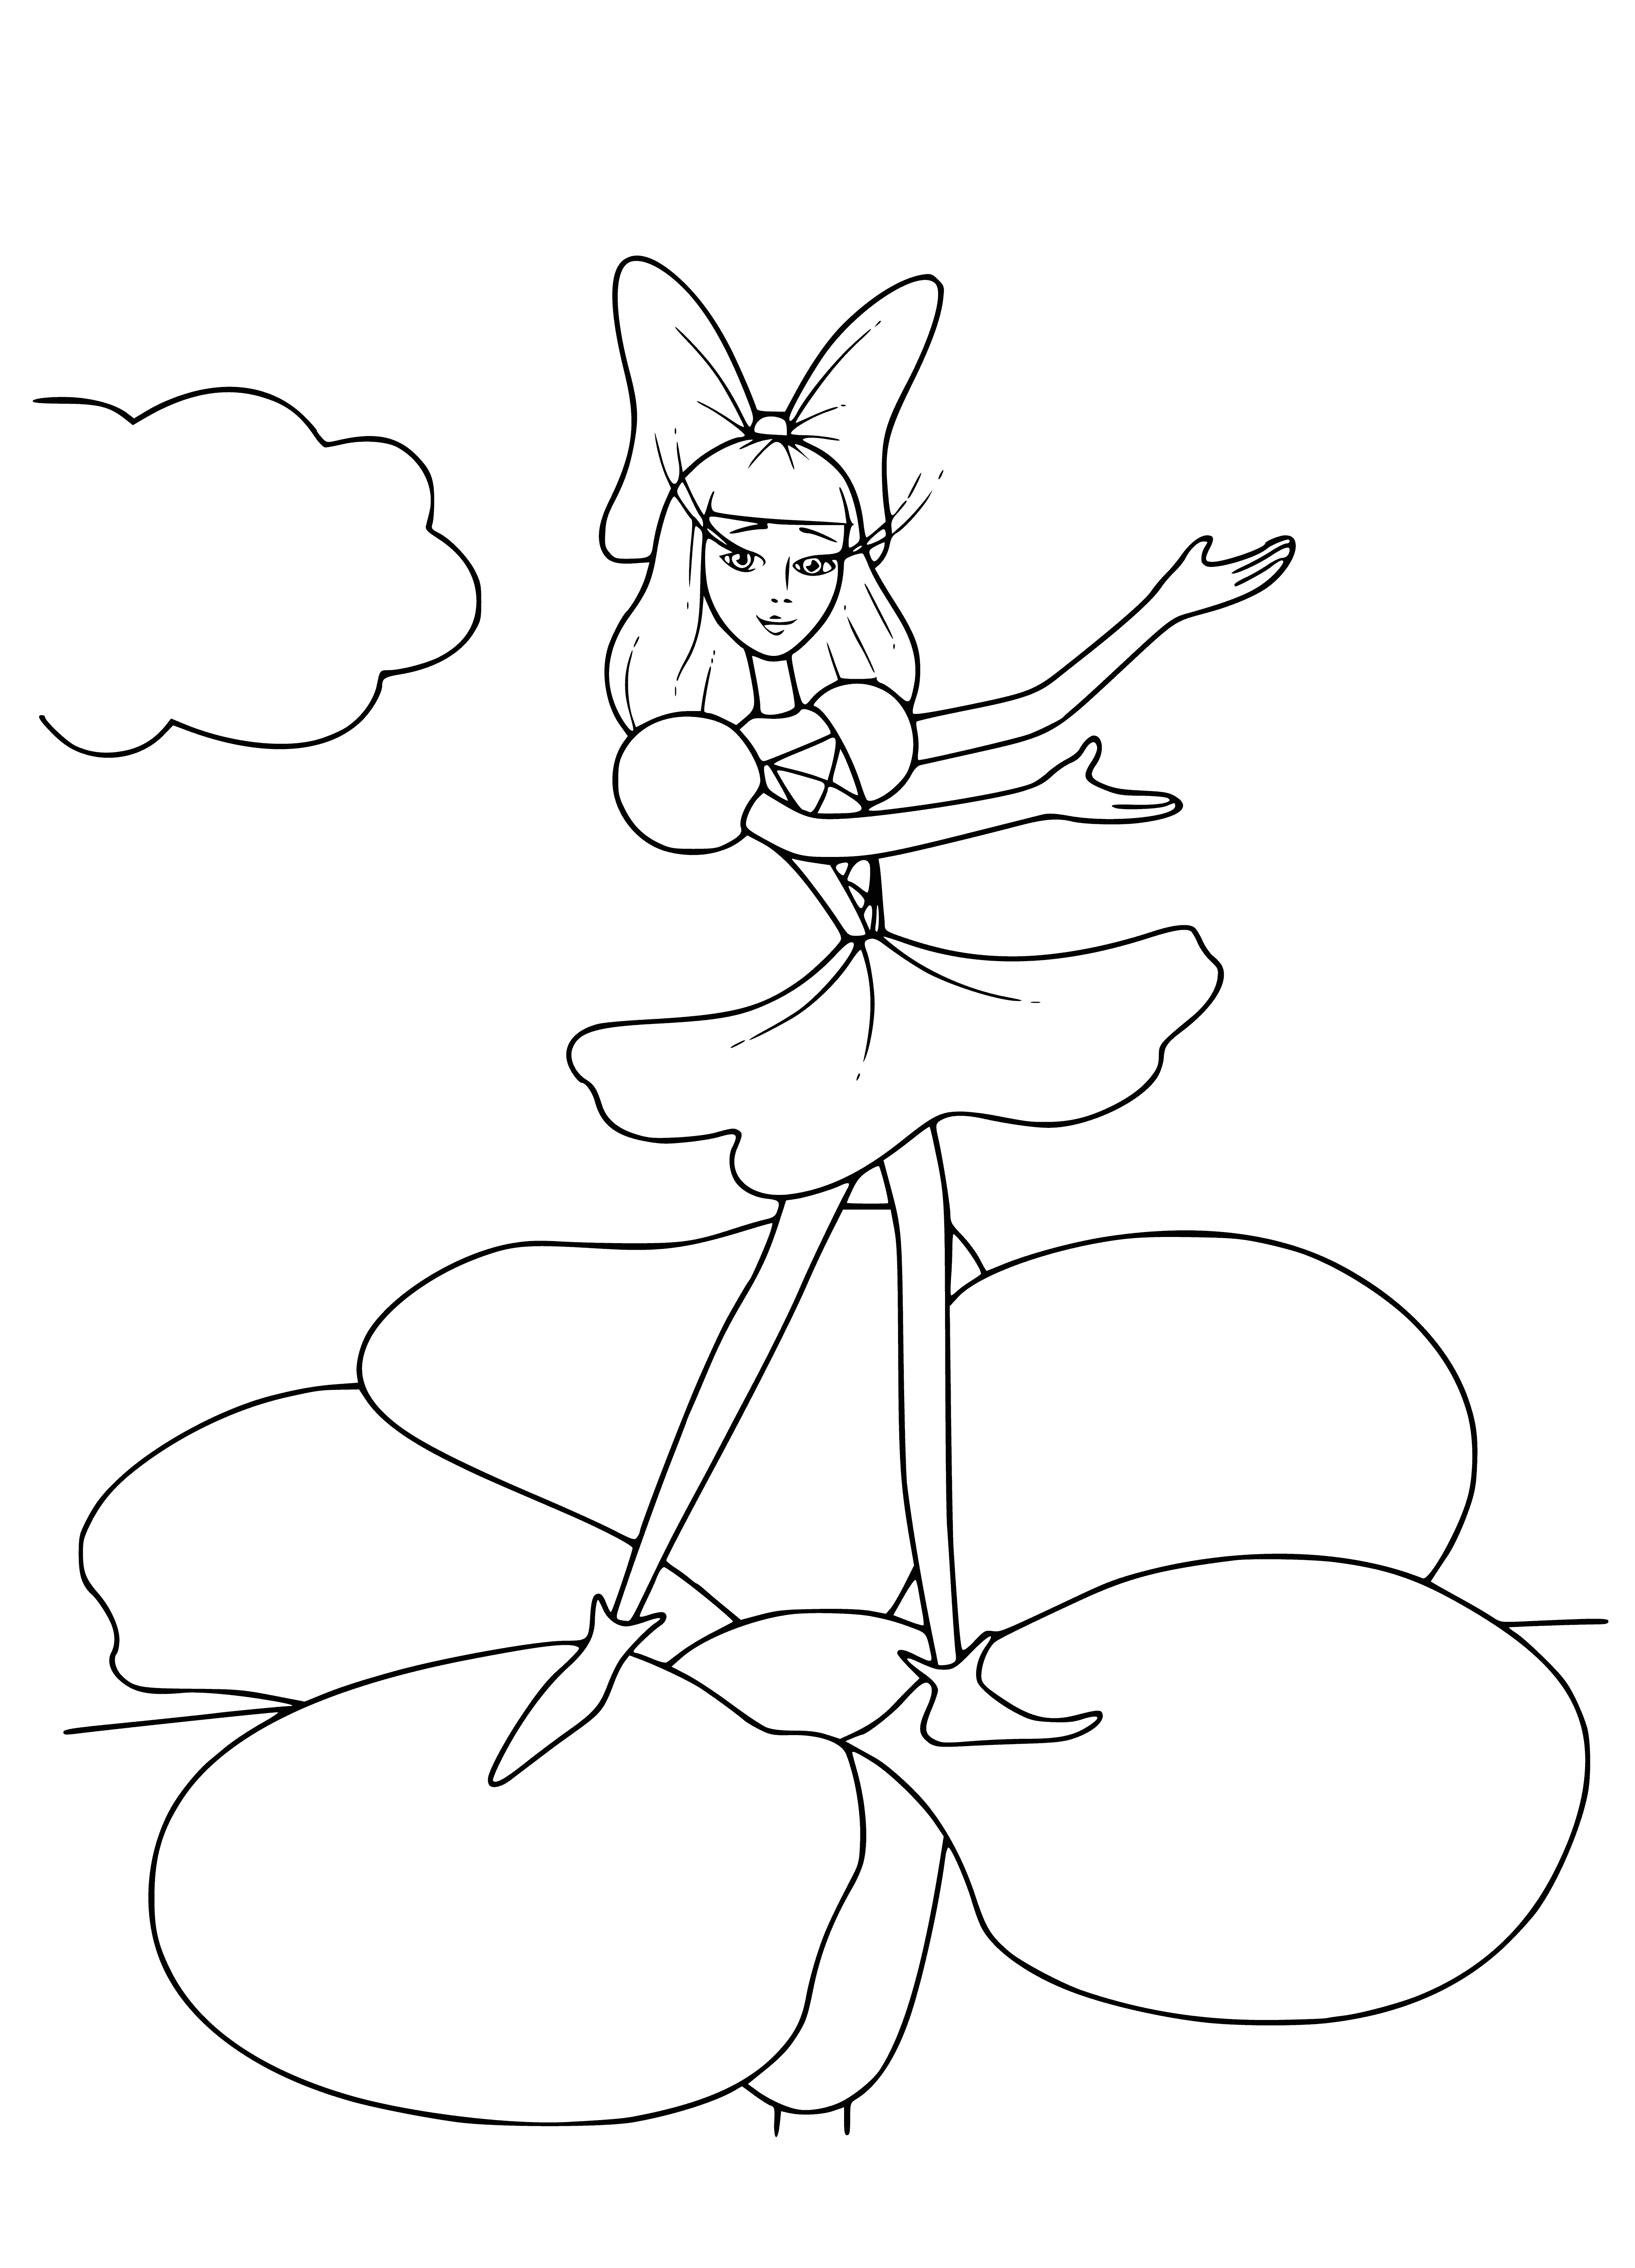 coloring page: A delicate blonde girl in a white dress sits atop a yellow flower, content and smiling.